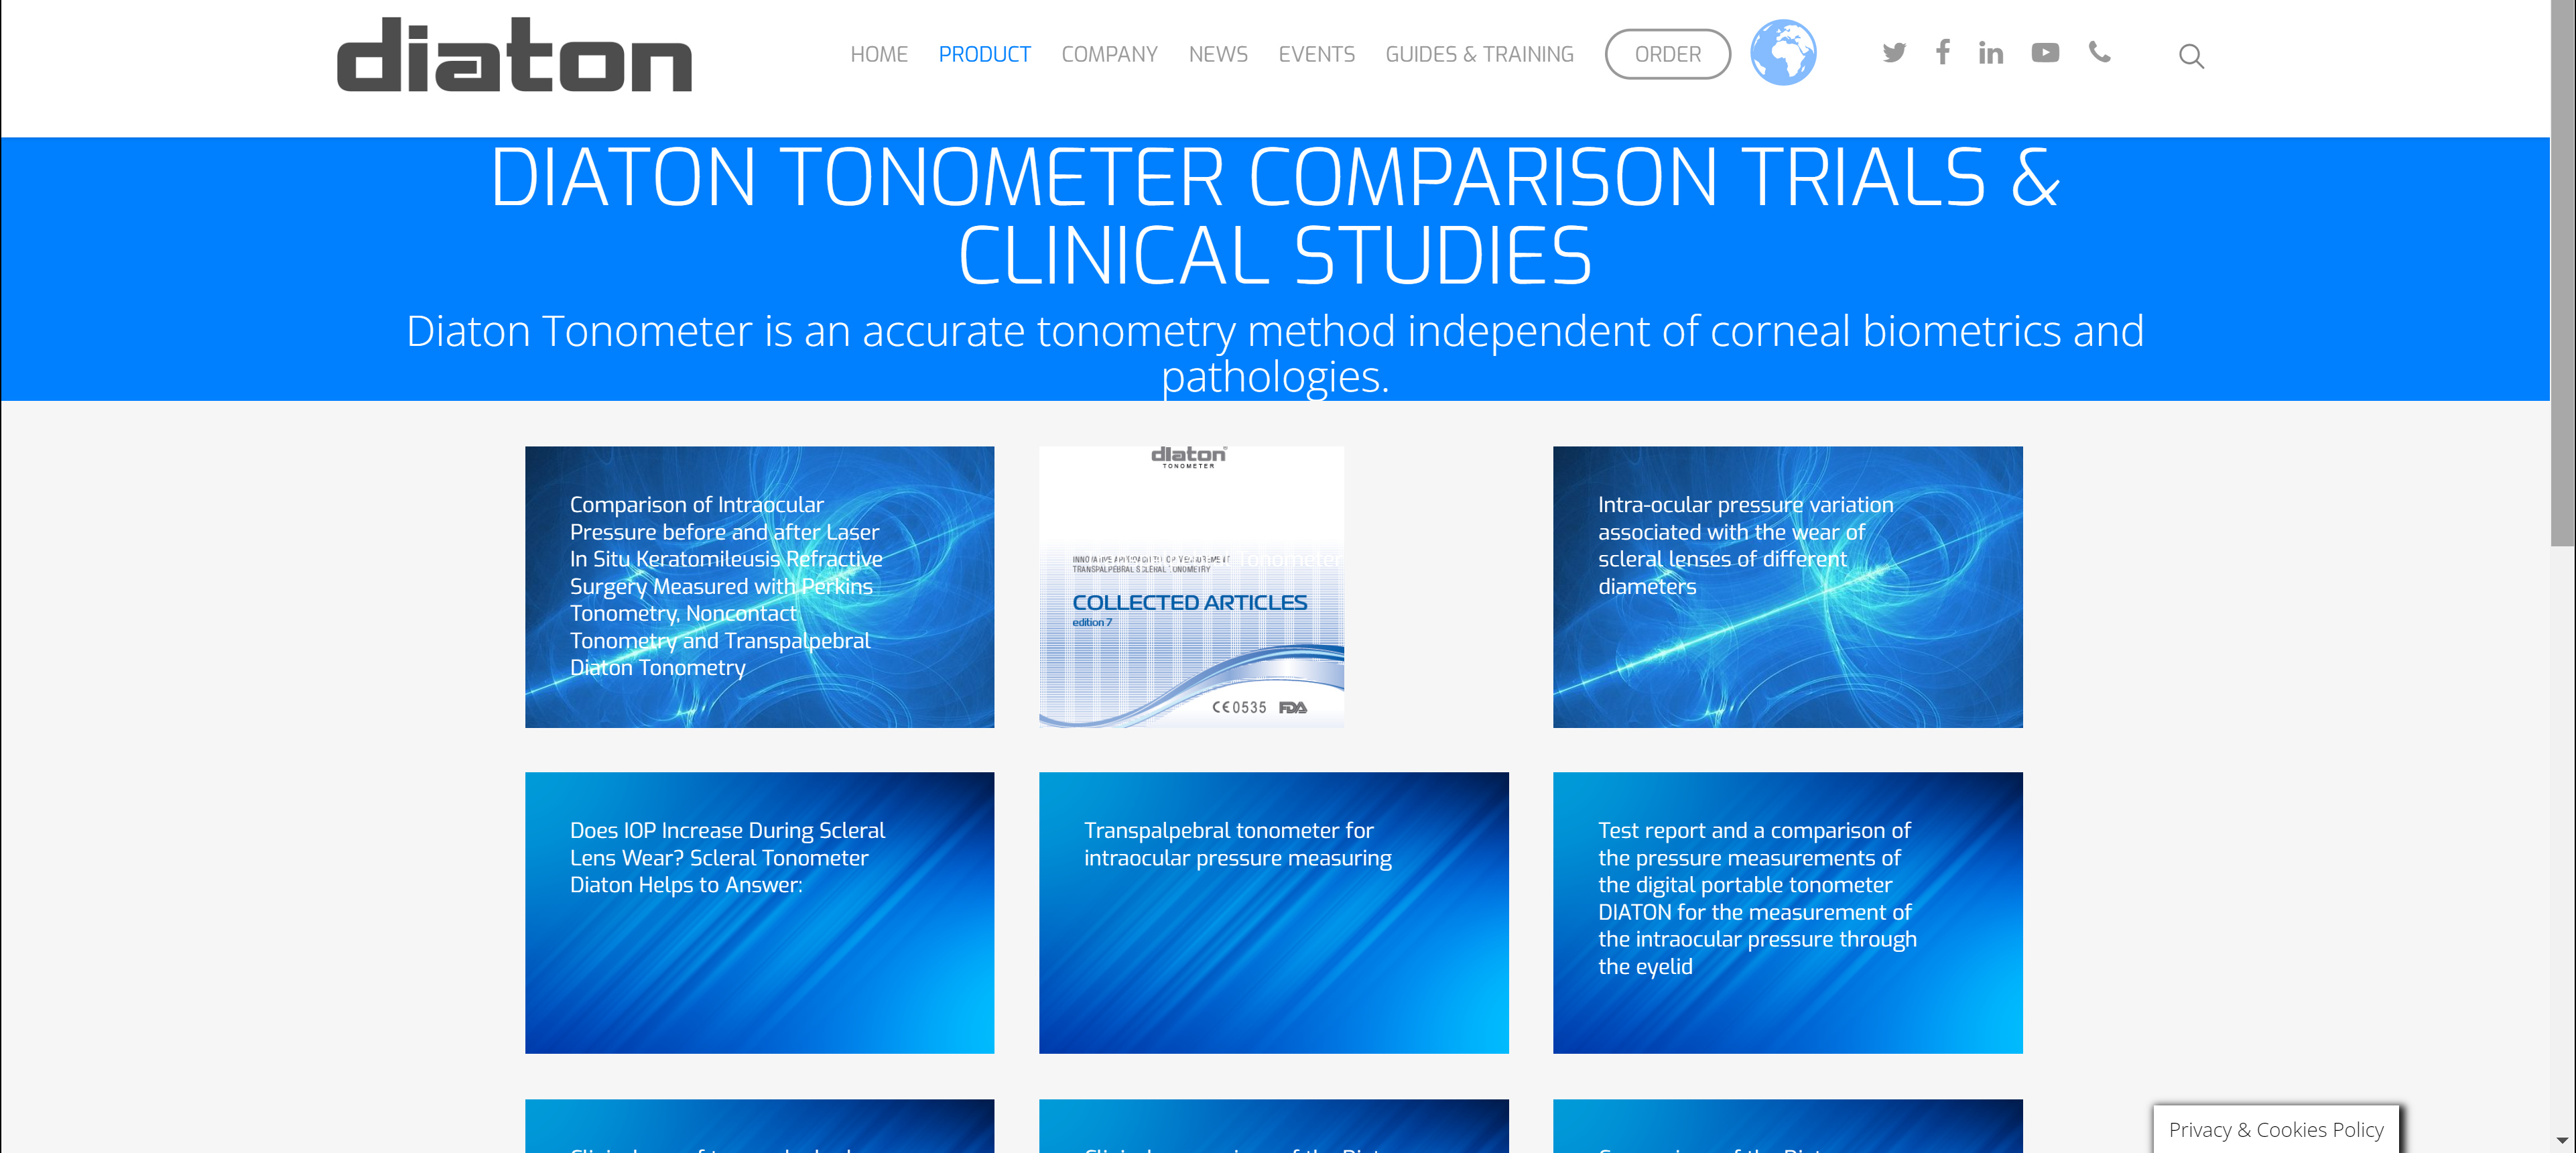 THE VITAL ROLE OF DIATON® TONOMETER IN CLINICAL STUDIES